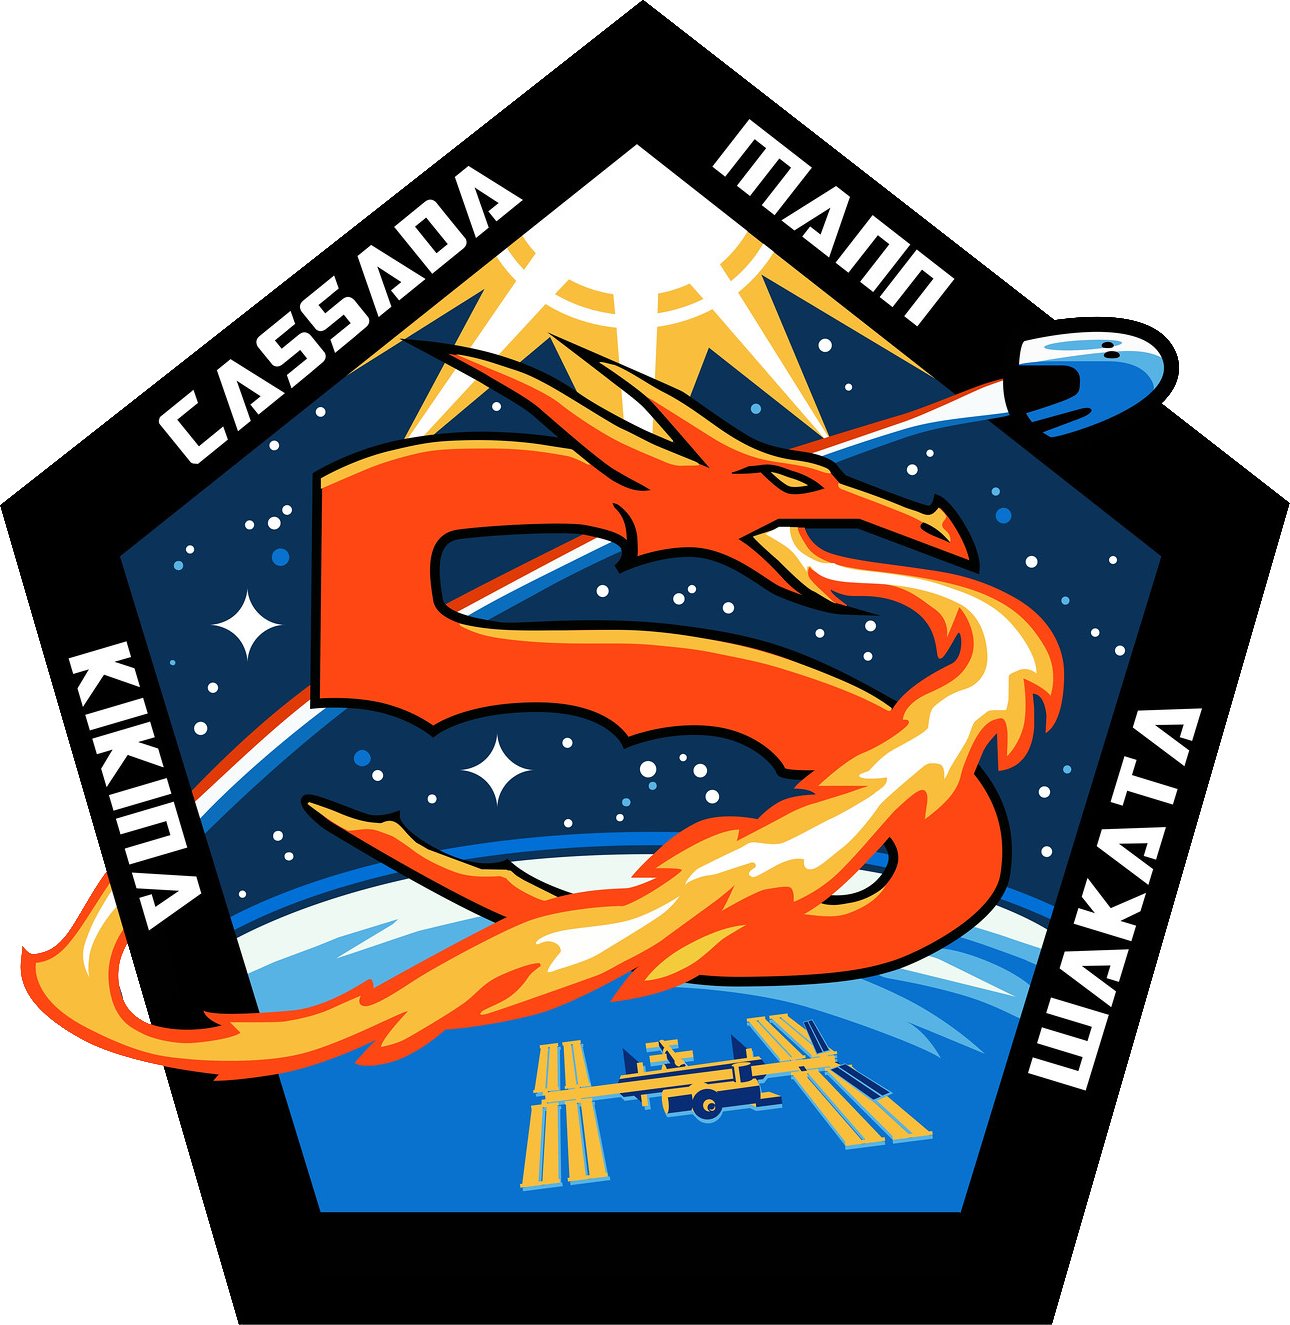 Mission patch for Crew-5